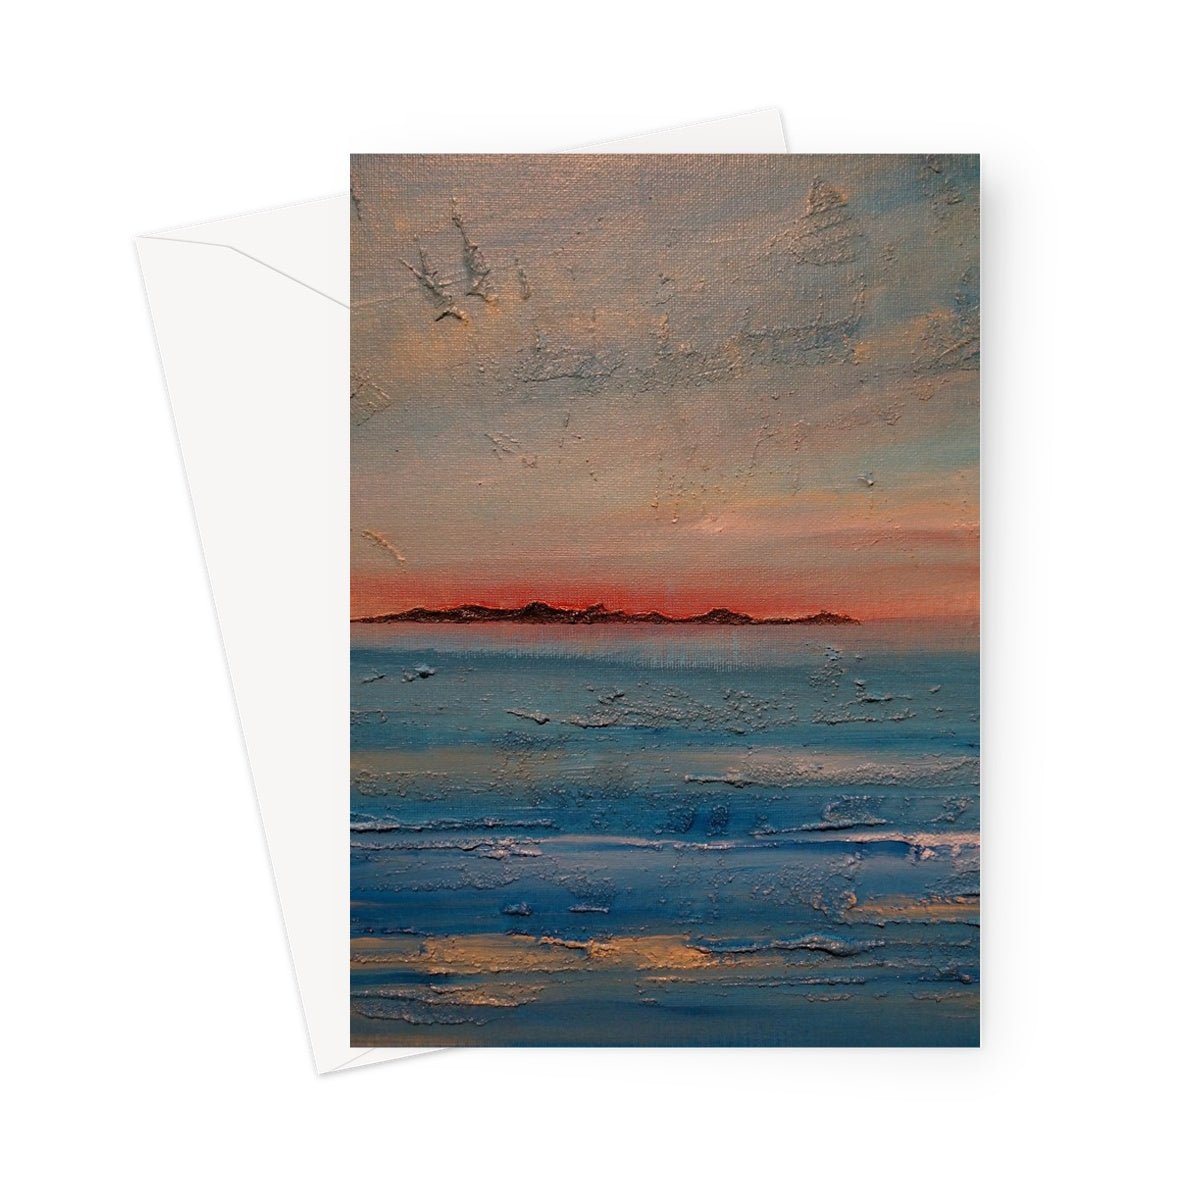 Gigha Sunset Art Gifts Greeting Card-Greetings Cards-Hebridean Islands Art Gallery-5"x7"-10 Cards-Paintings, Prints, Homeware, Art Gifts From Scotland By Scottish Artist Kevin Hunter